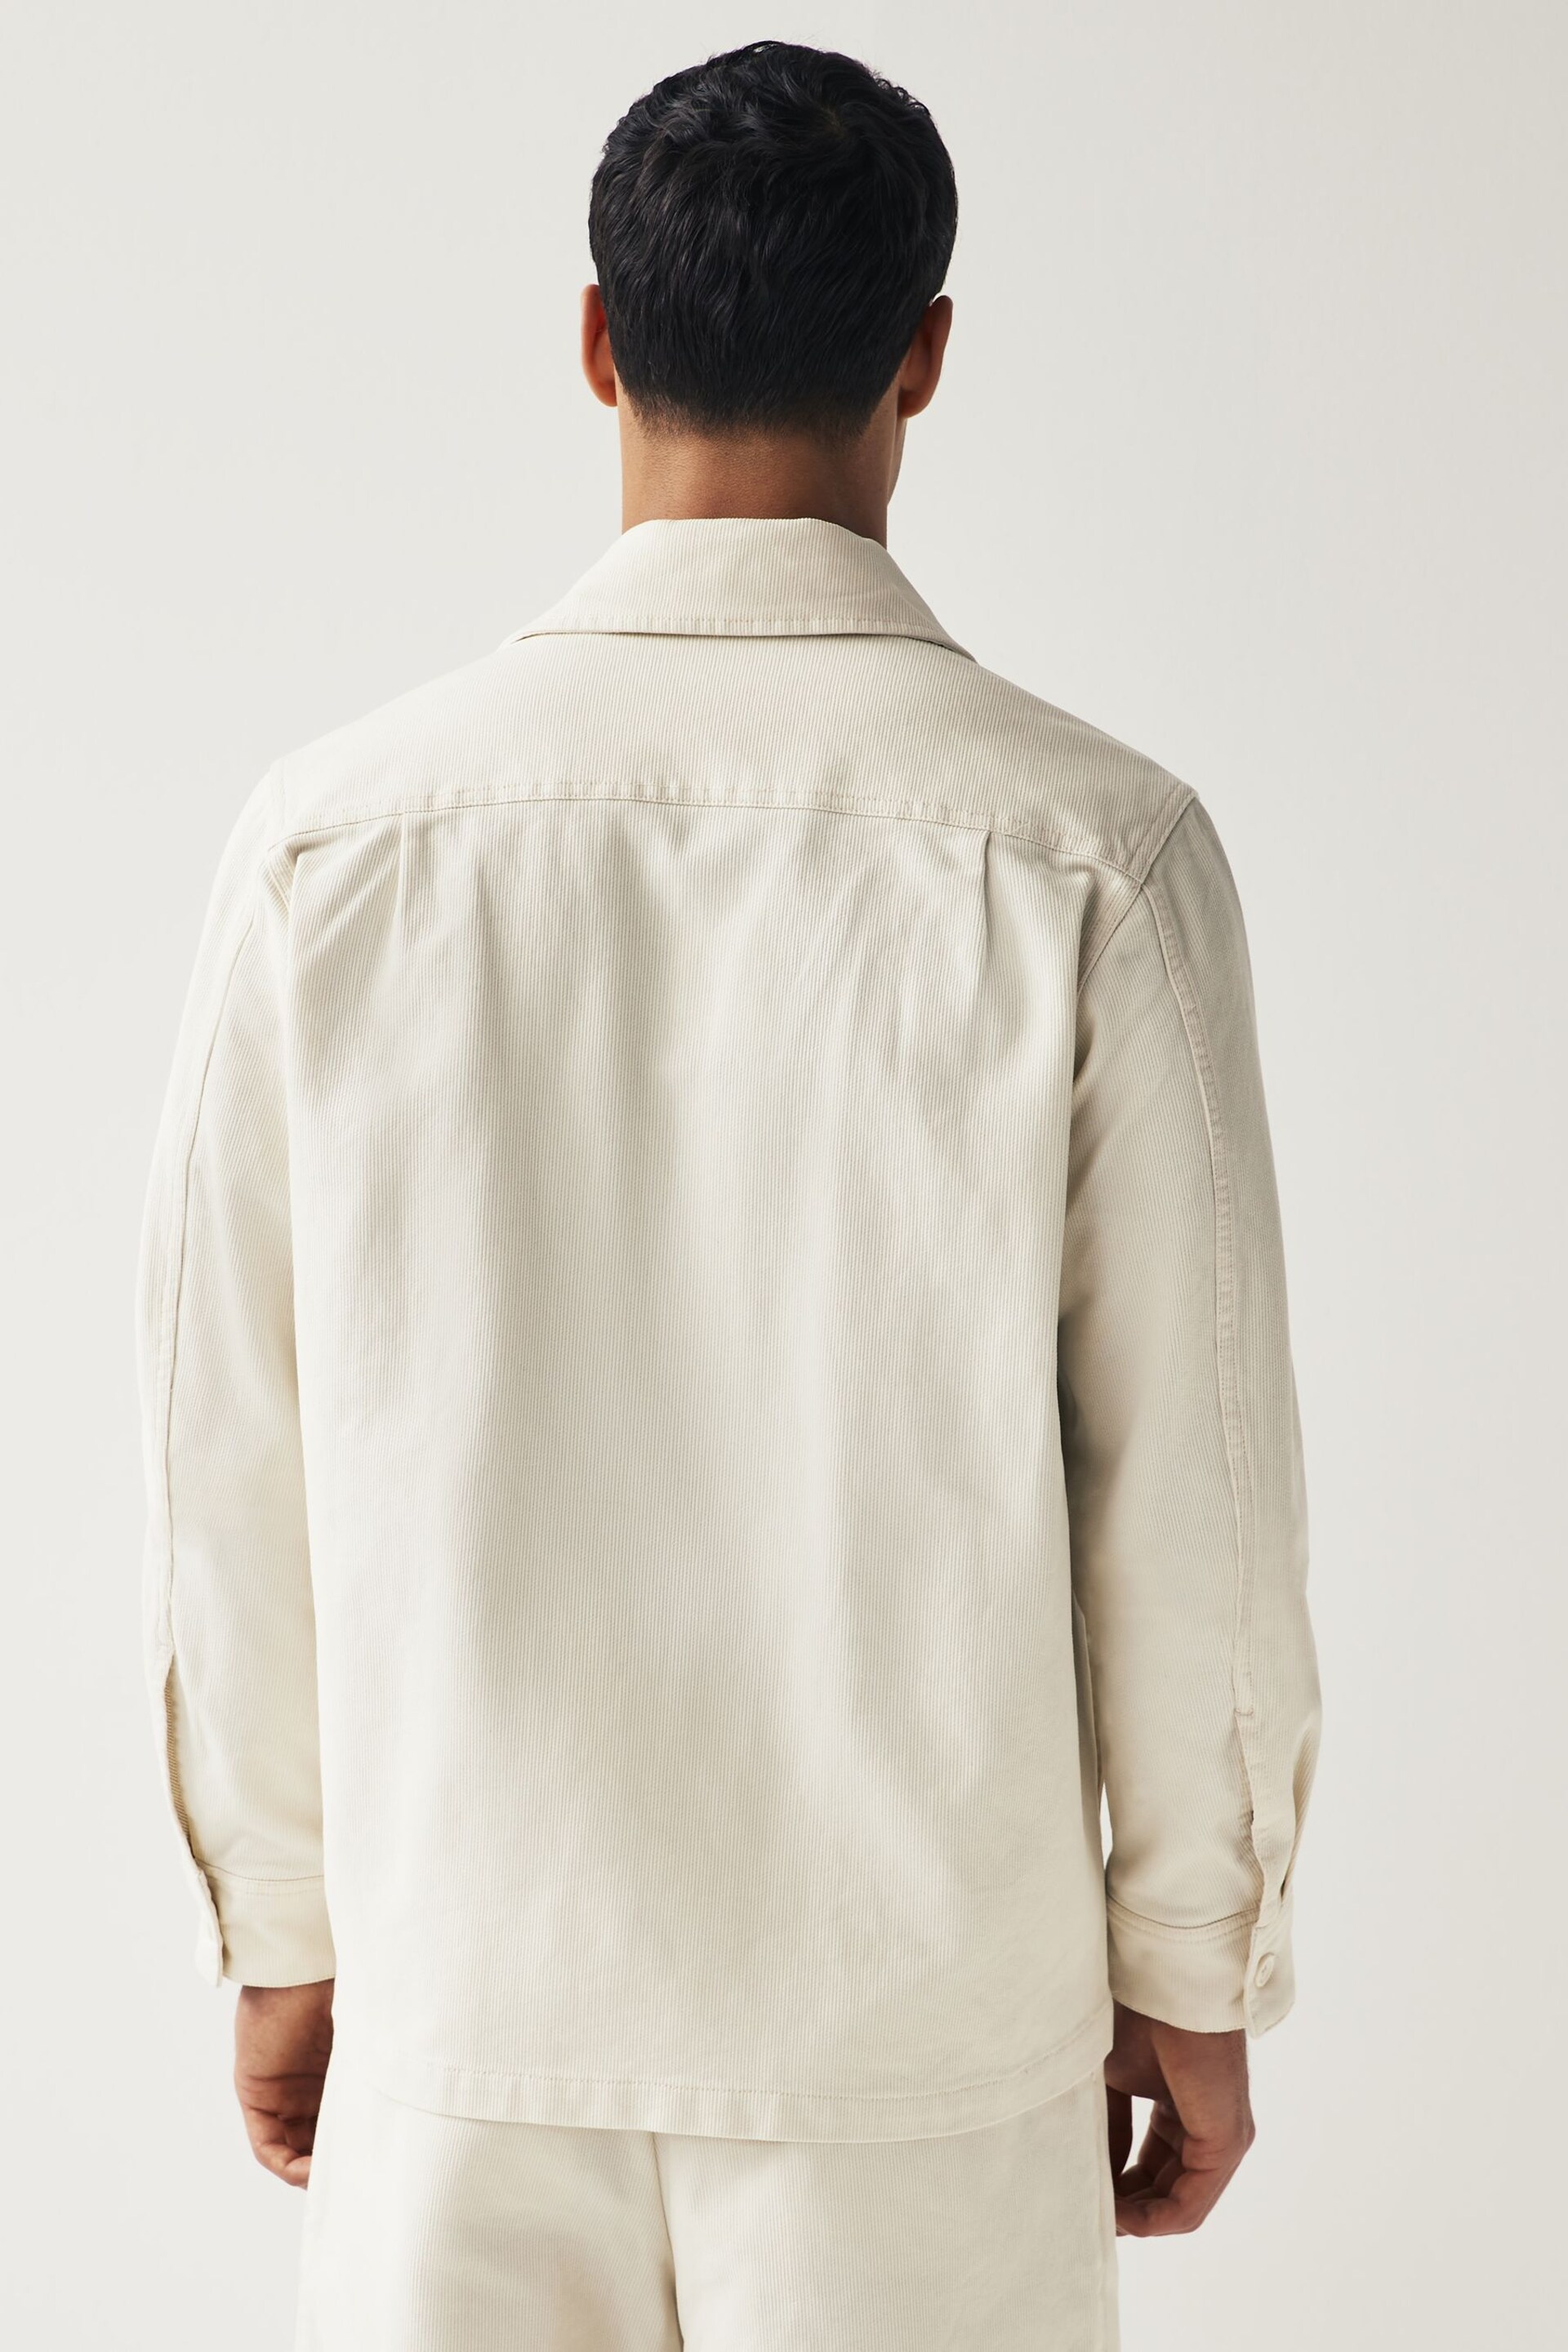 Fred Perry Ecru White Bedford Cord Overshirt - Image 2 of 6